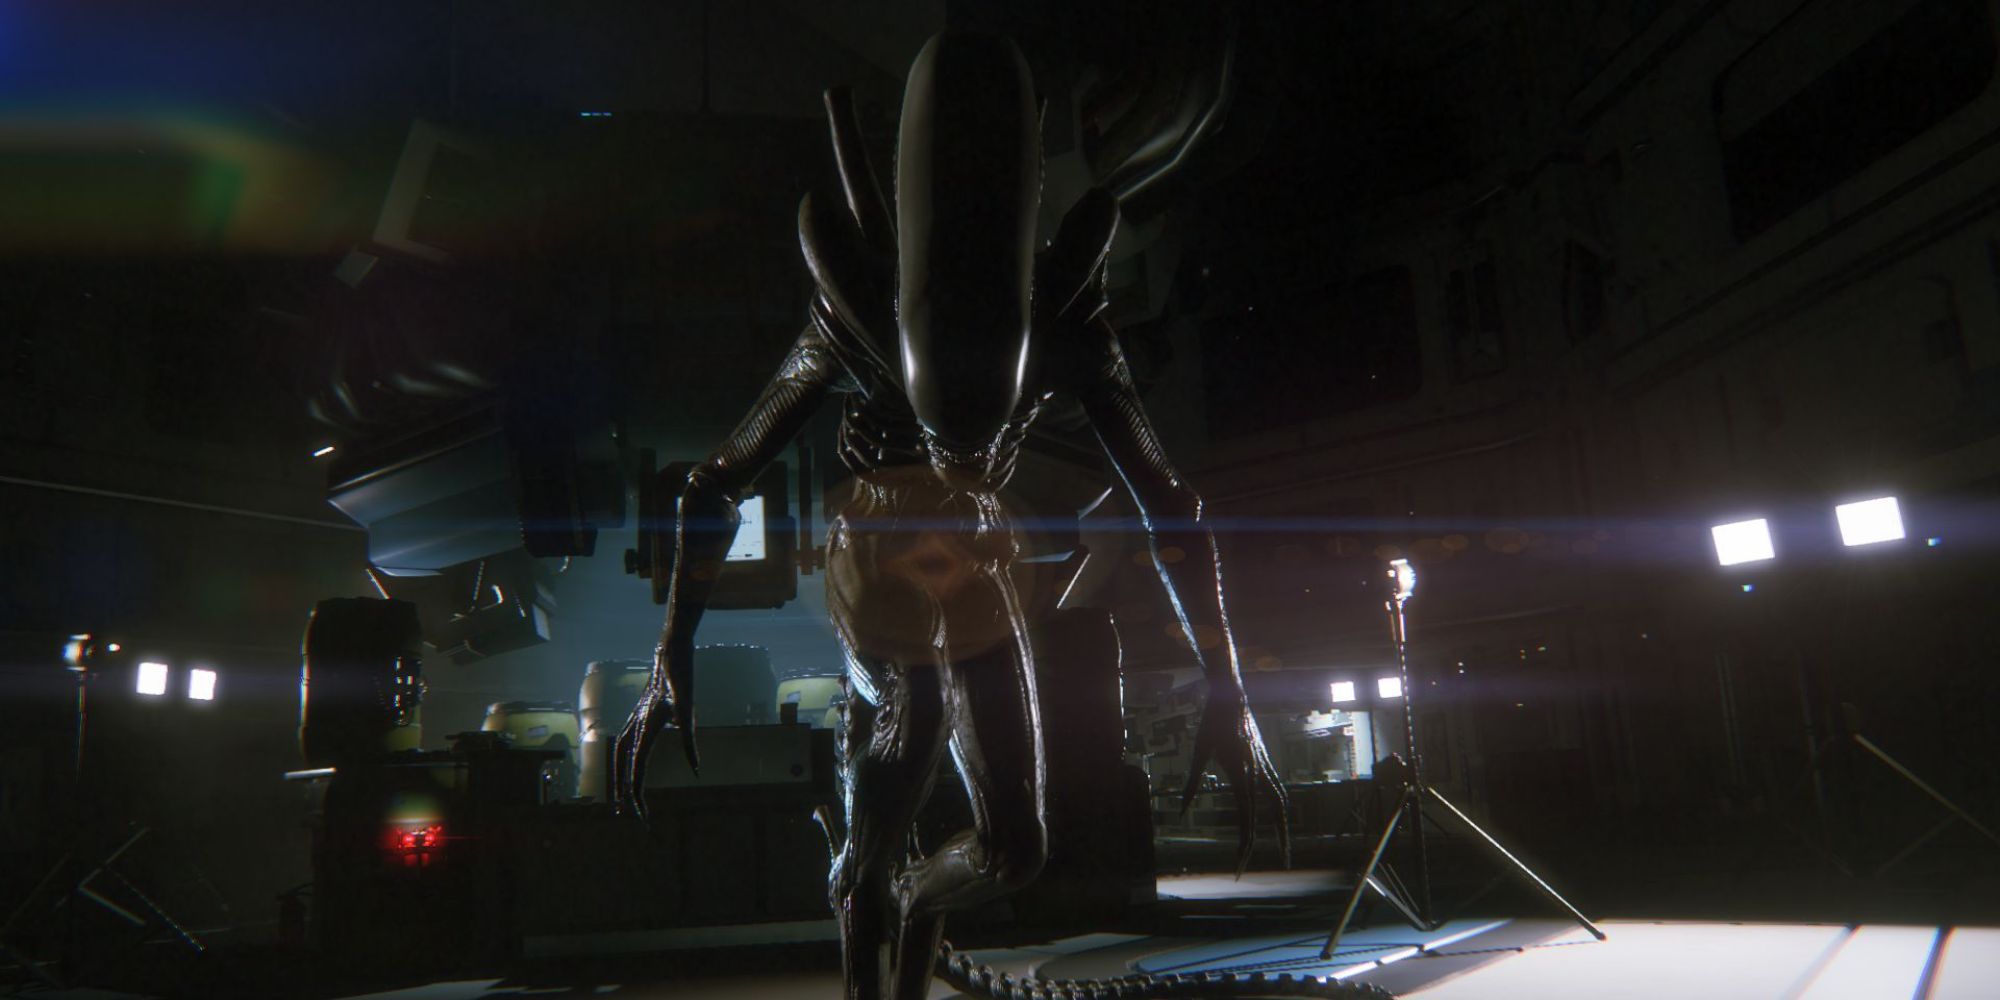 The Xenomorph faces the player in the space station as surrounding lights shine from behind it